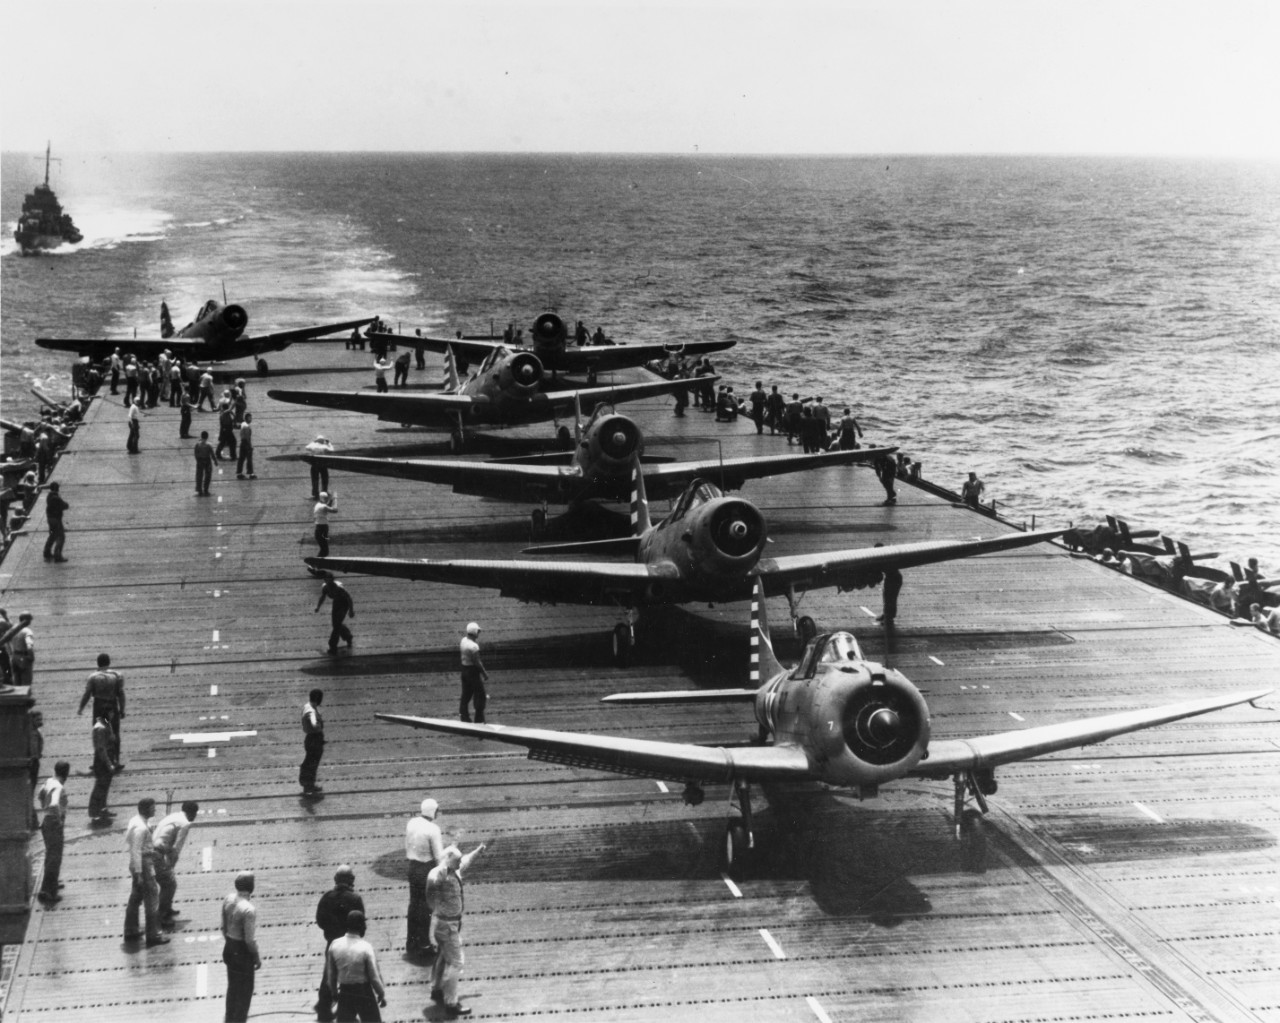 An SBD Dauntless and five TBD-1 Devastators of VT-6 prepare to take off from the ship as she steams southward through a calm sea, 4 May 1942. The launching officer signals the pilots by hand (lower left). (U.S. Navy Photograph 80-G-10151, Nationa...